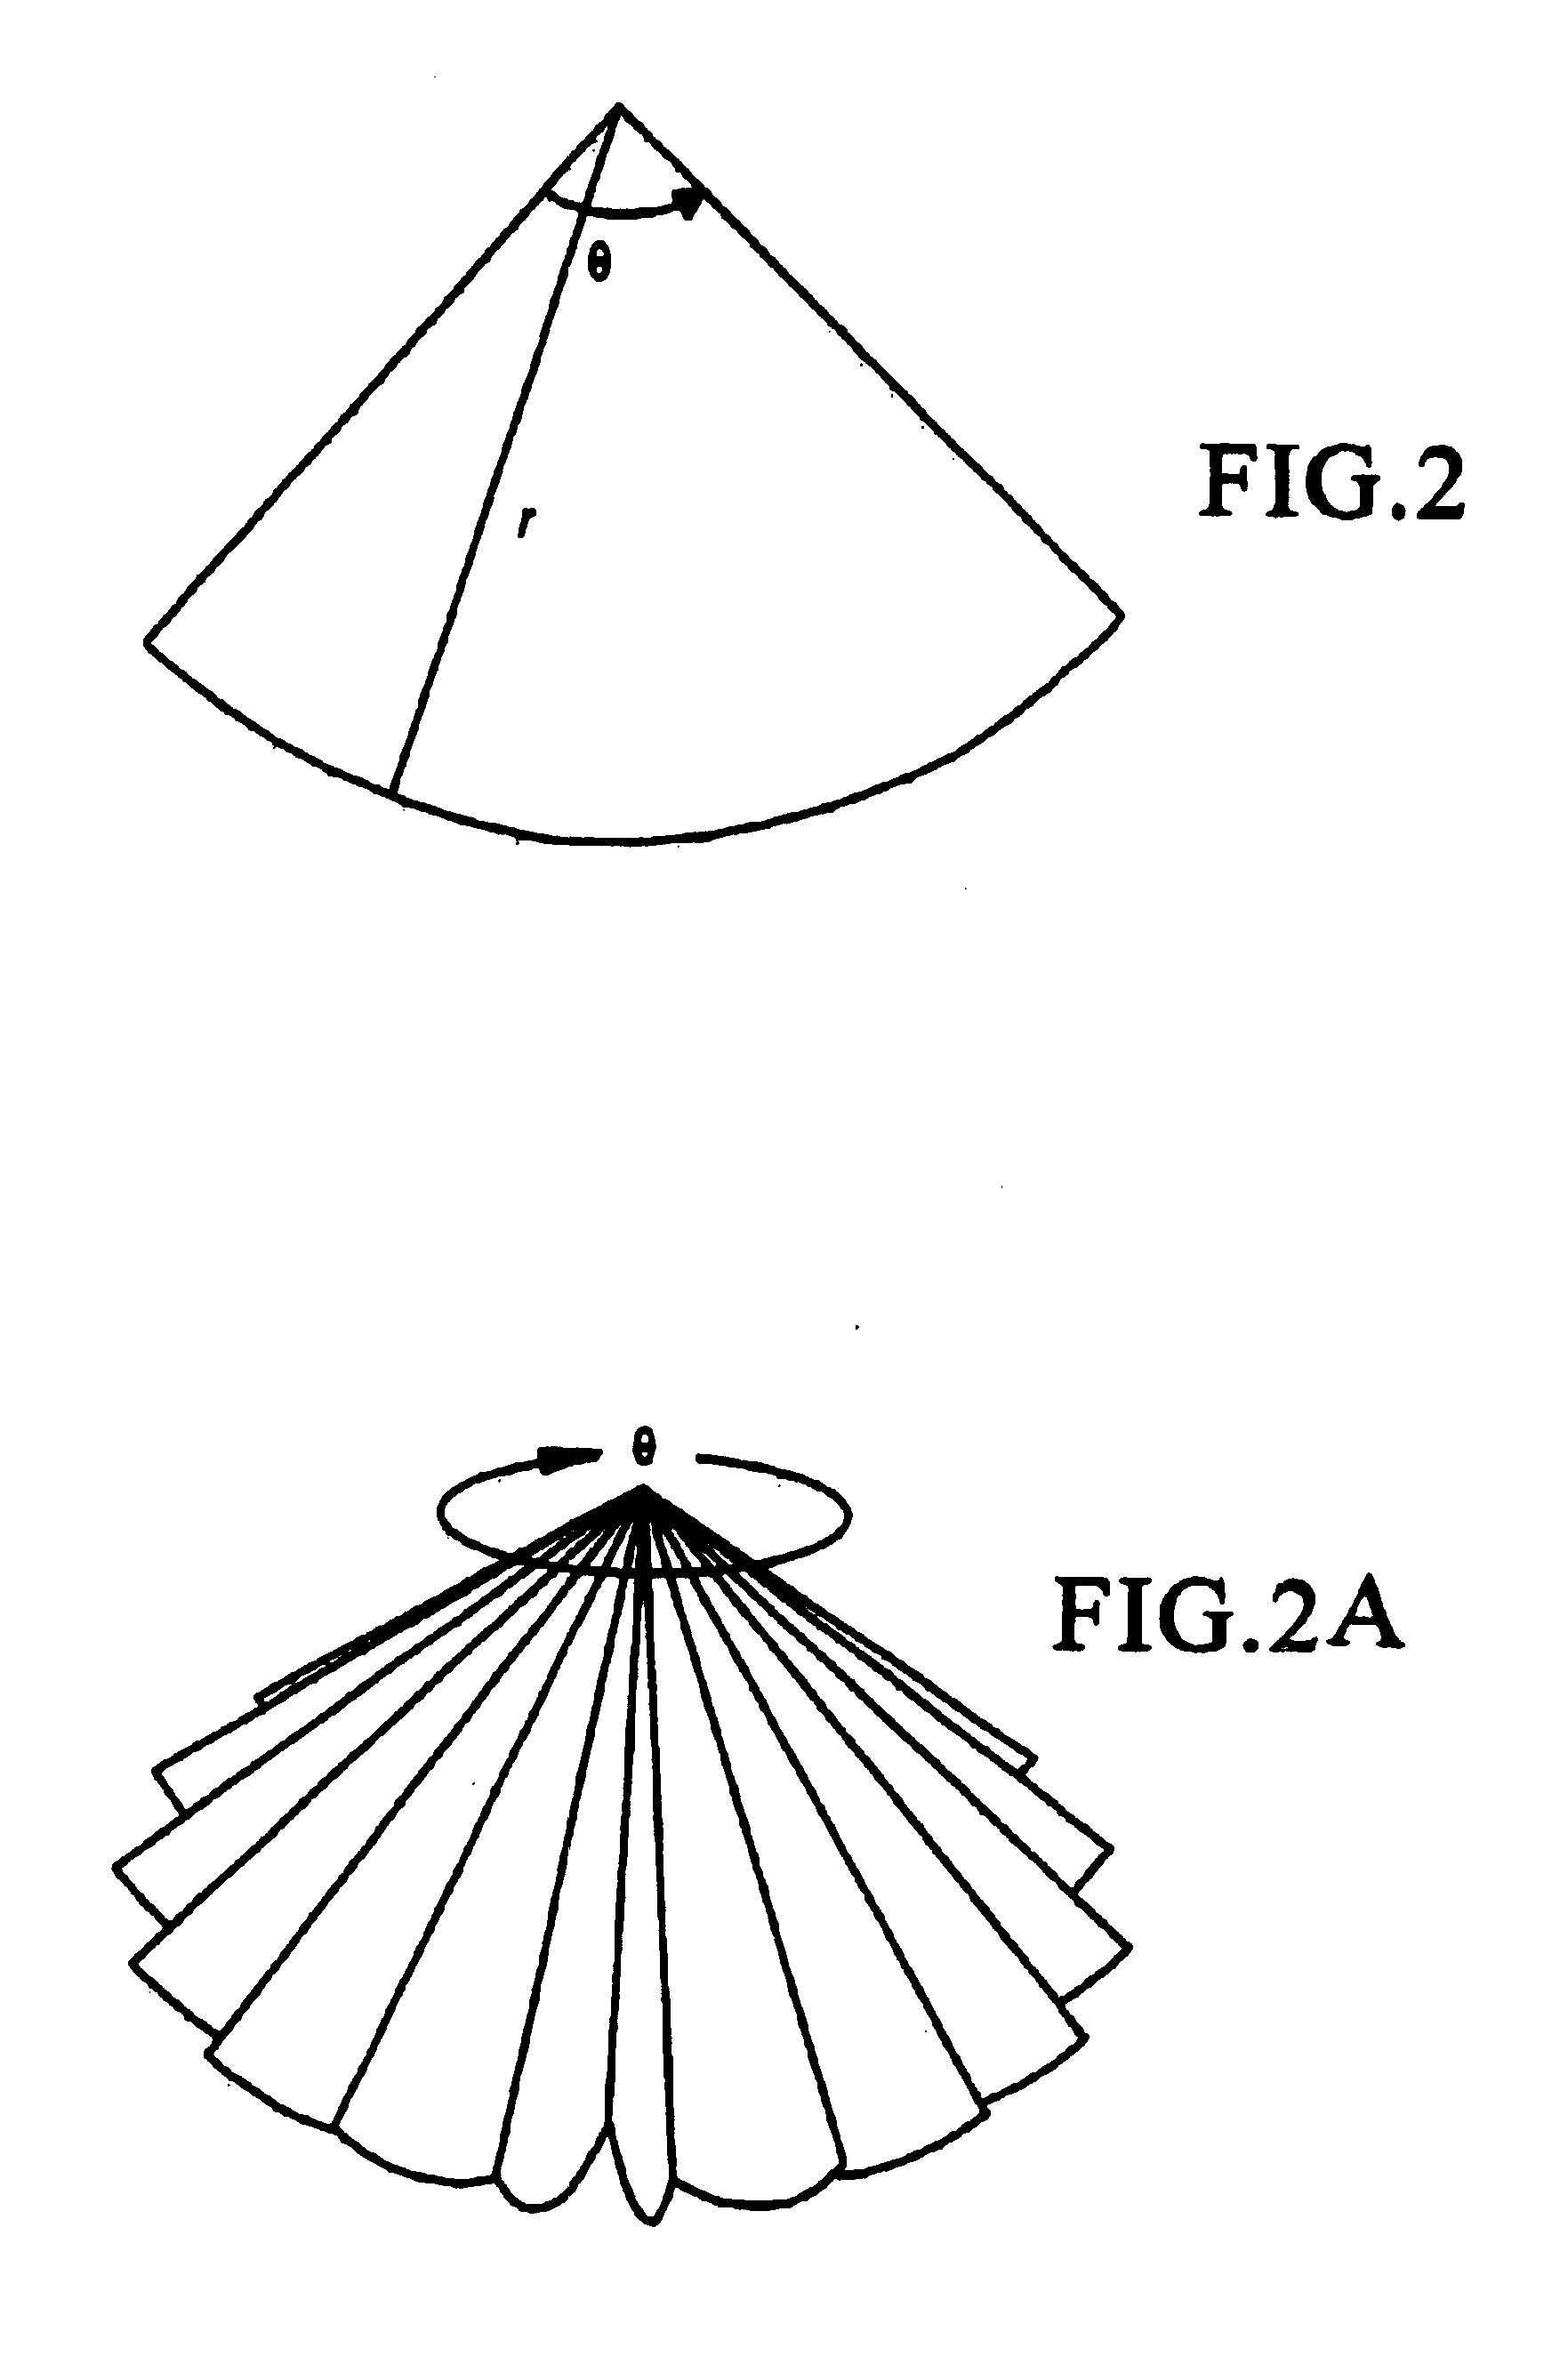 Three-dimensional system for abdominal aortic aneurysm evaluation